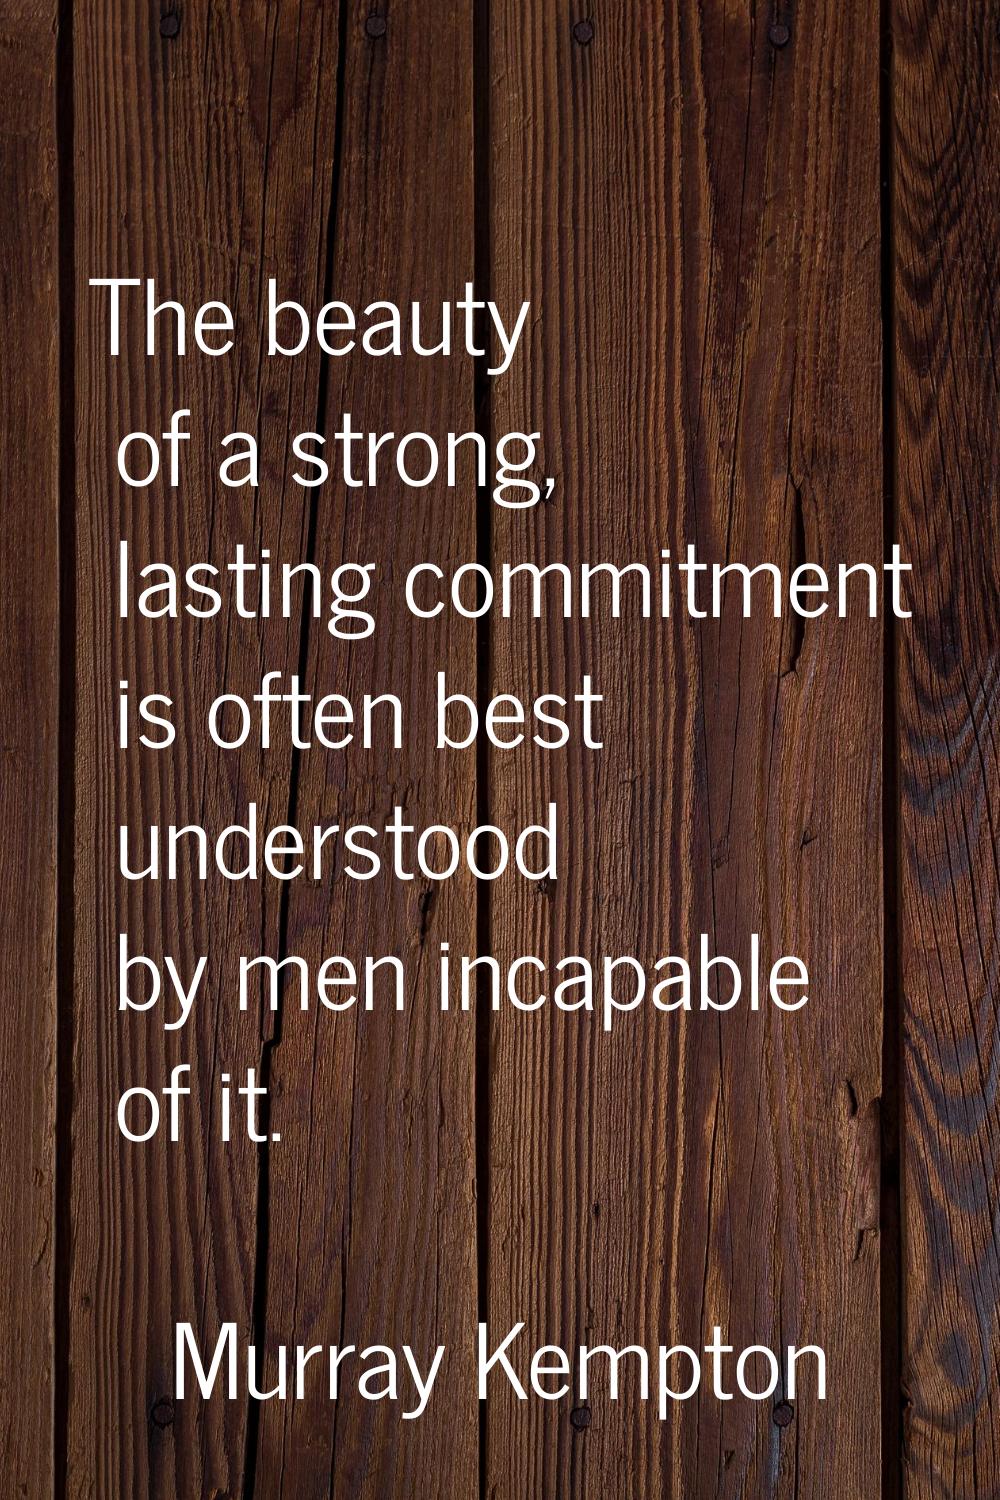 The beauty of a strong, lasting commitment is often best understood by men incapable of it.